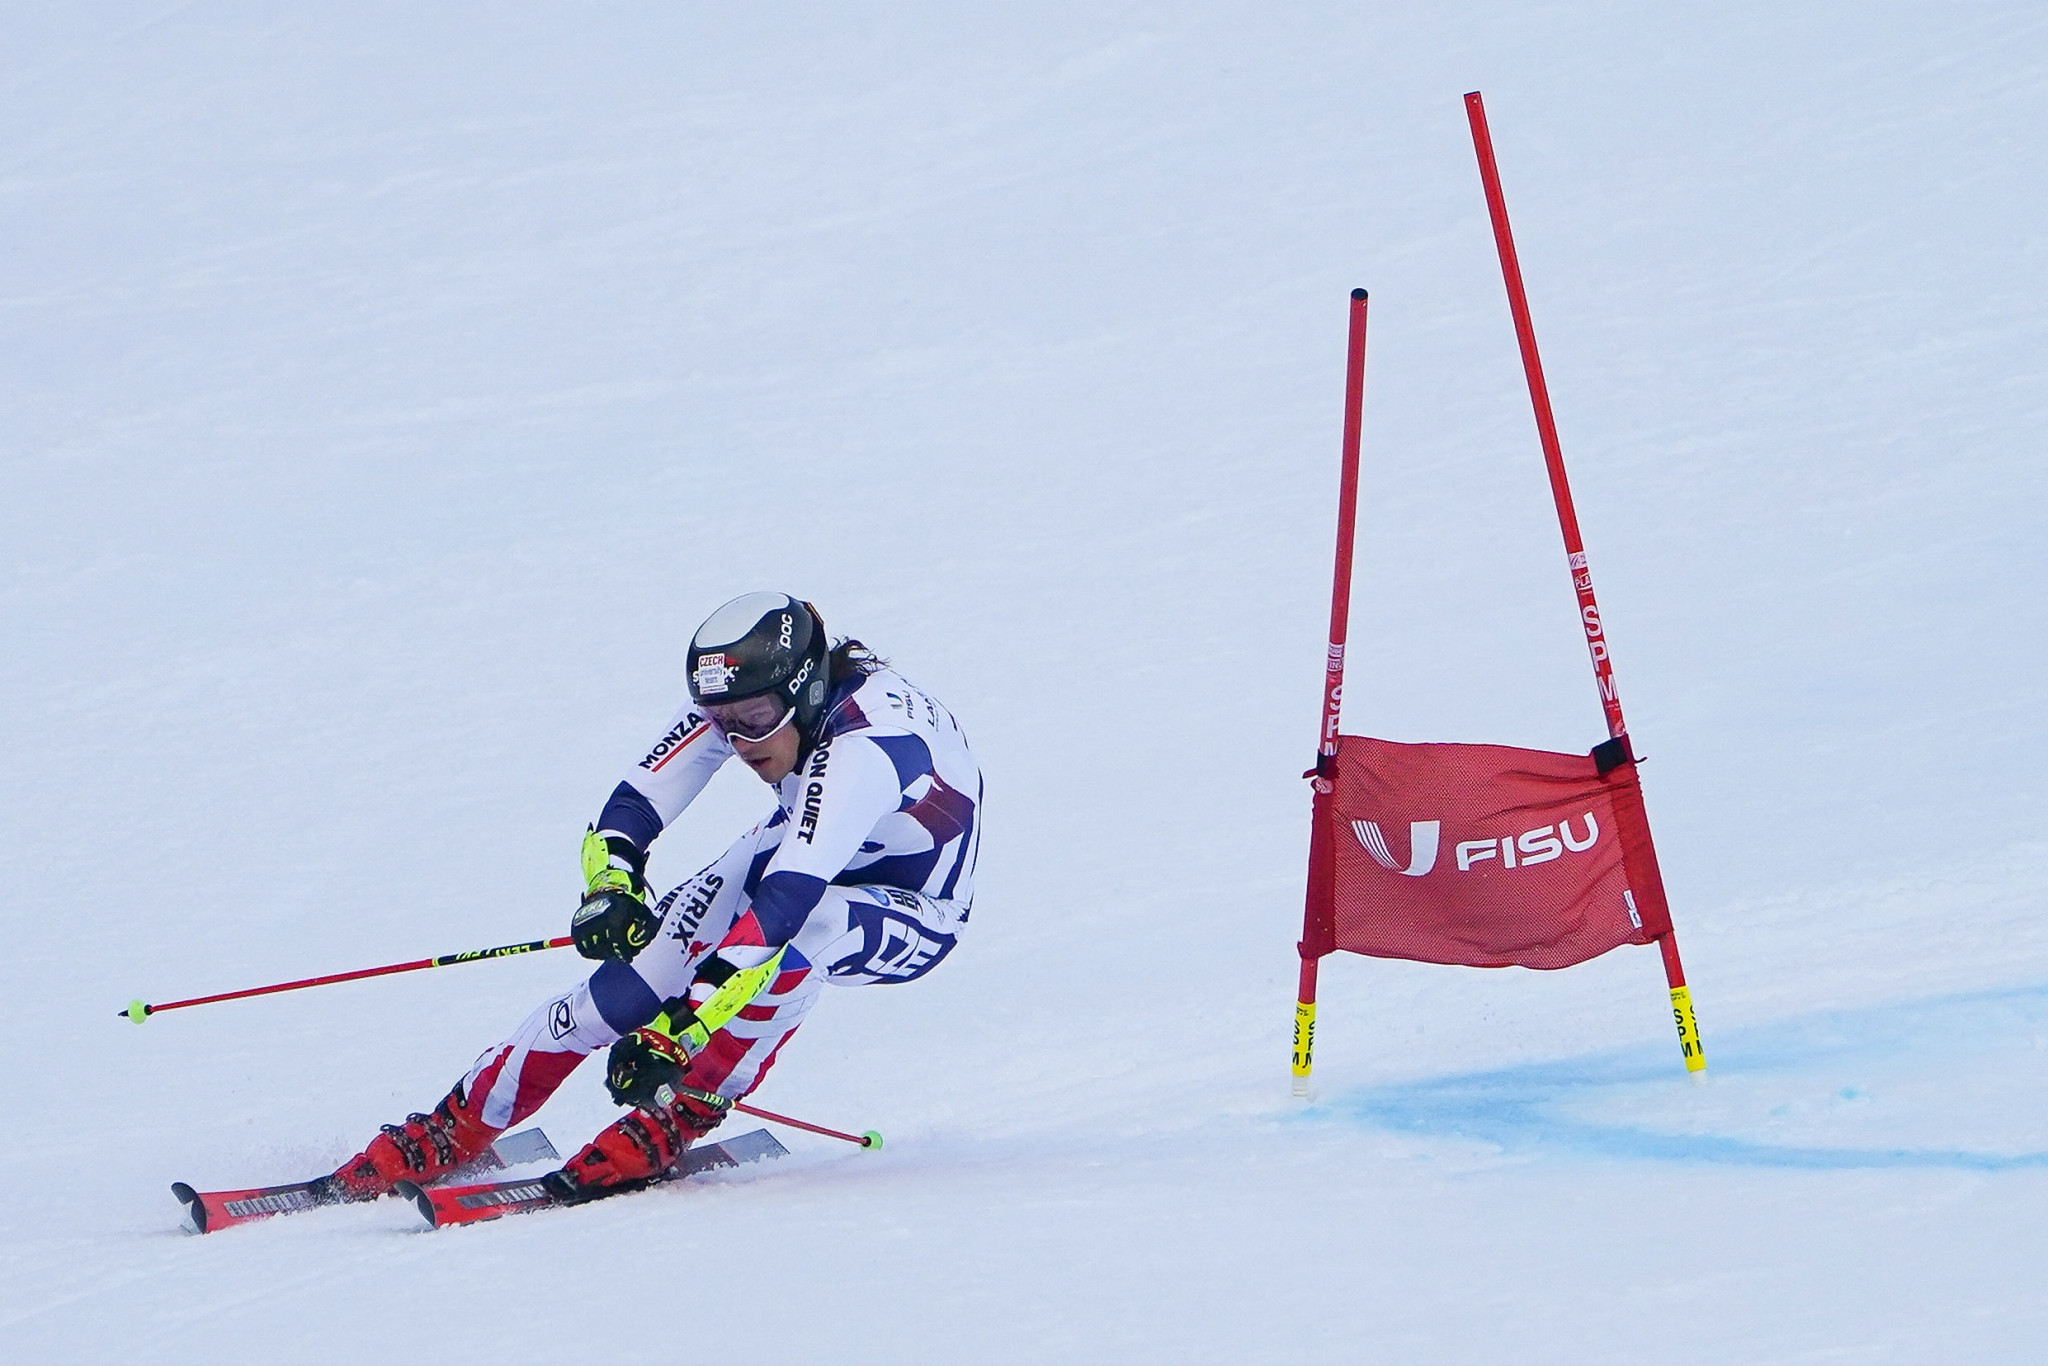 Jan Zabystran ripped gold away from Eric Wyler with the last run of the men's giant slalom competition ©FISU